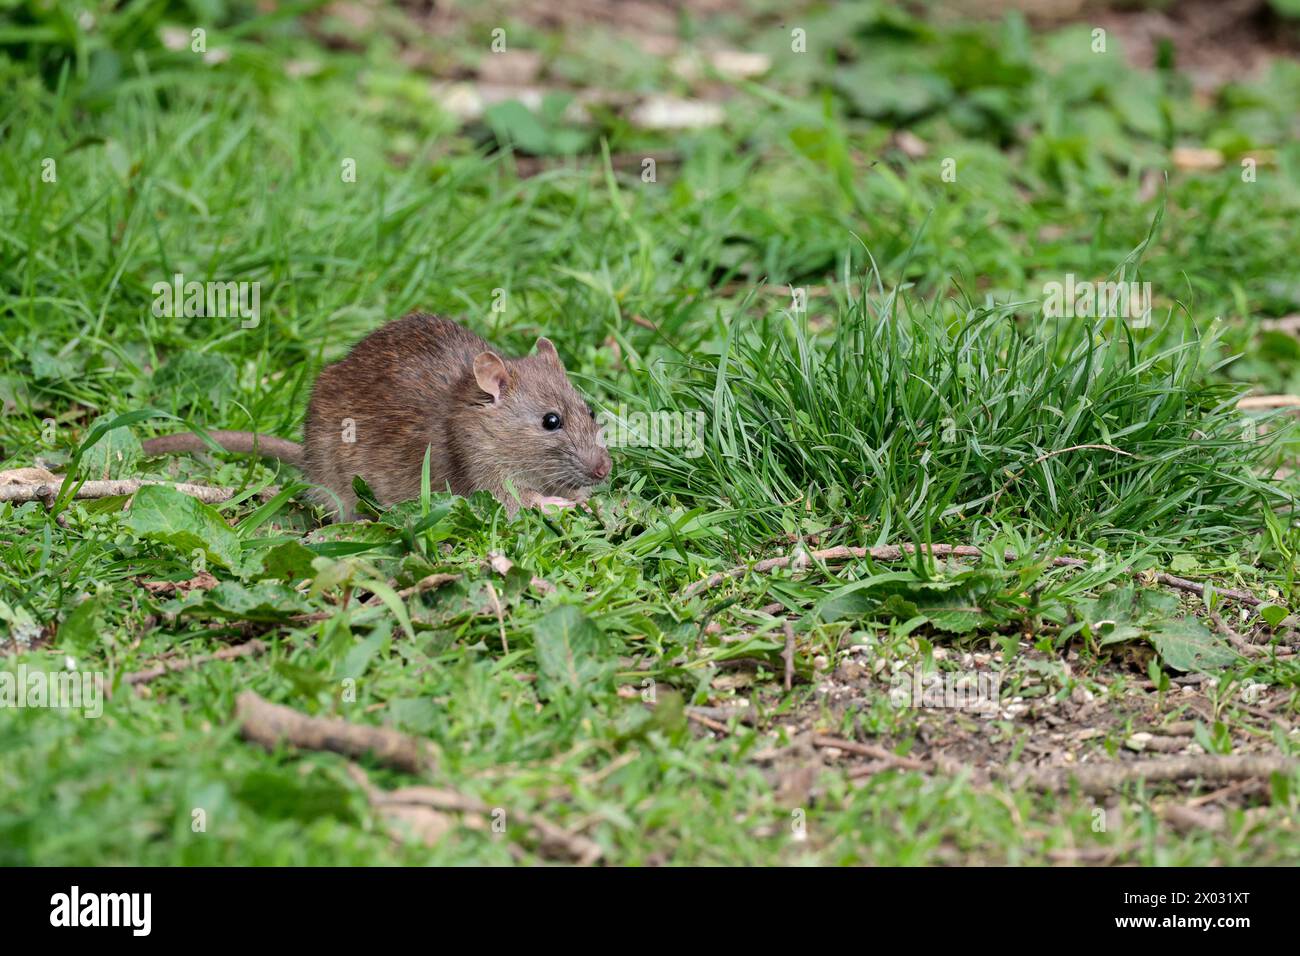 rat brown rattus norvegicus, grey brown rodent pointed face small round ears long scaly tail pink feet and nose in woodland bird hide feeding on seed Stock Photo